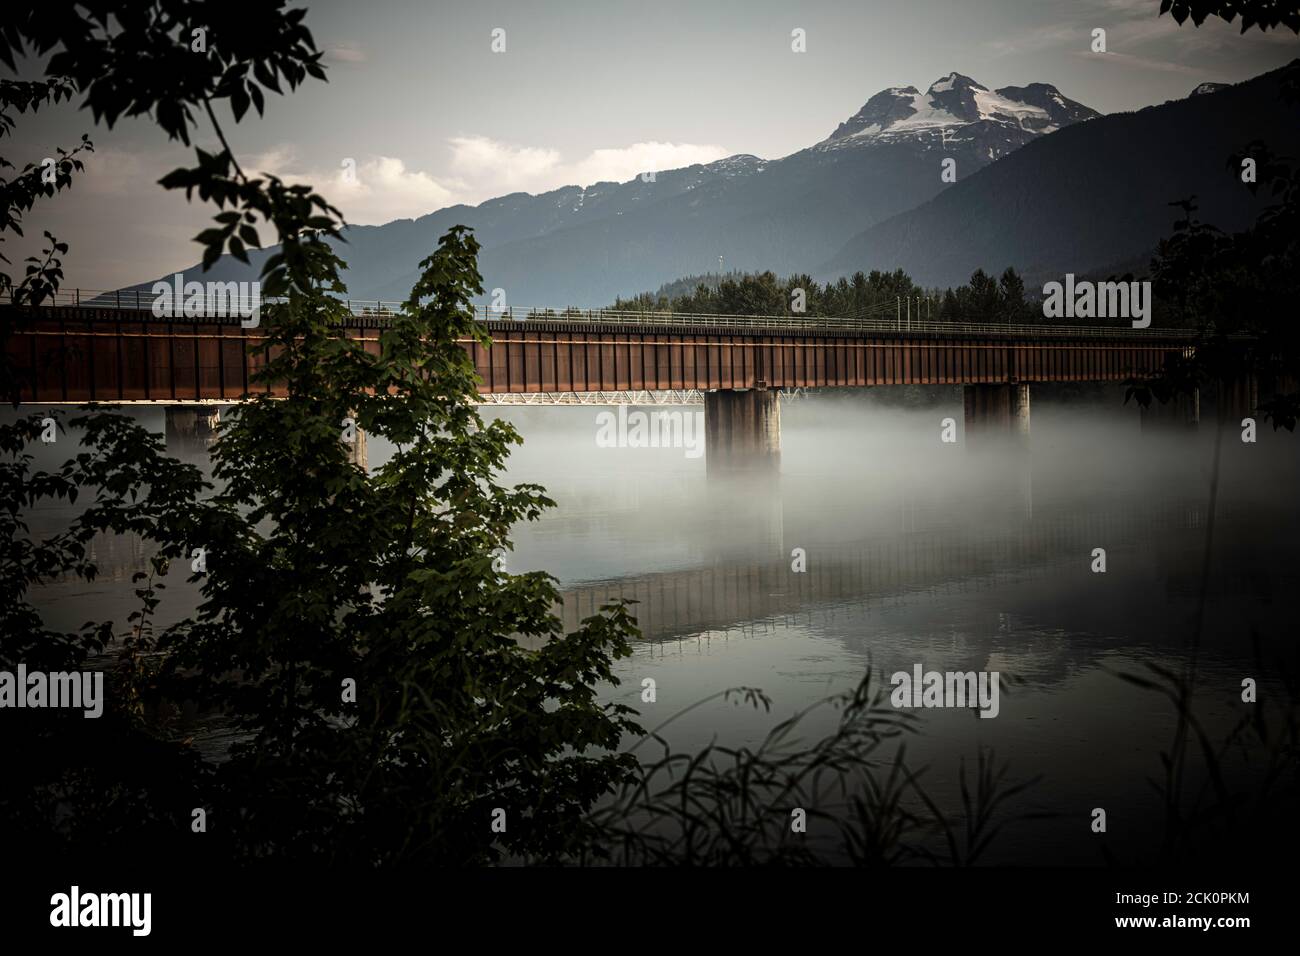 The Revelstoke CP Rail Line bridge over a foggy Columbia river with Begbie Mountain in the Background. Stock Photo